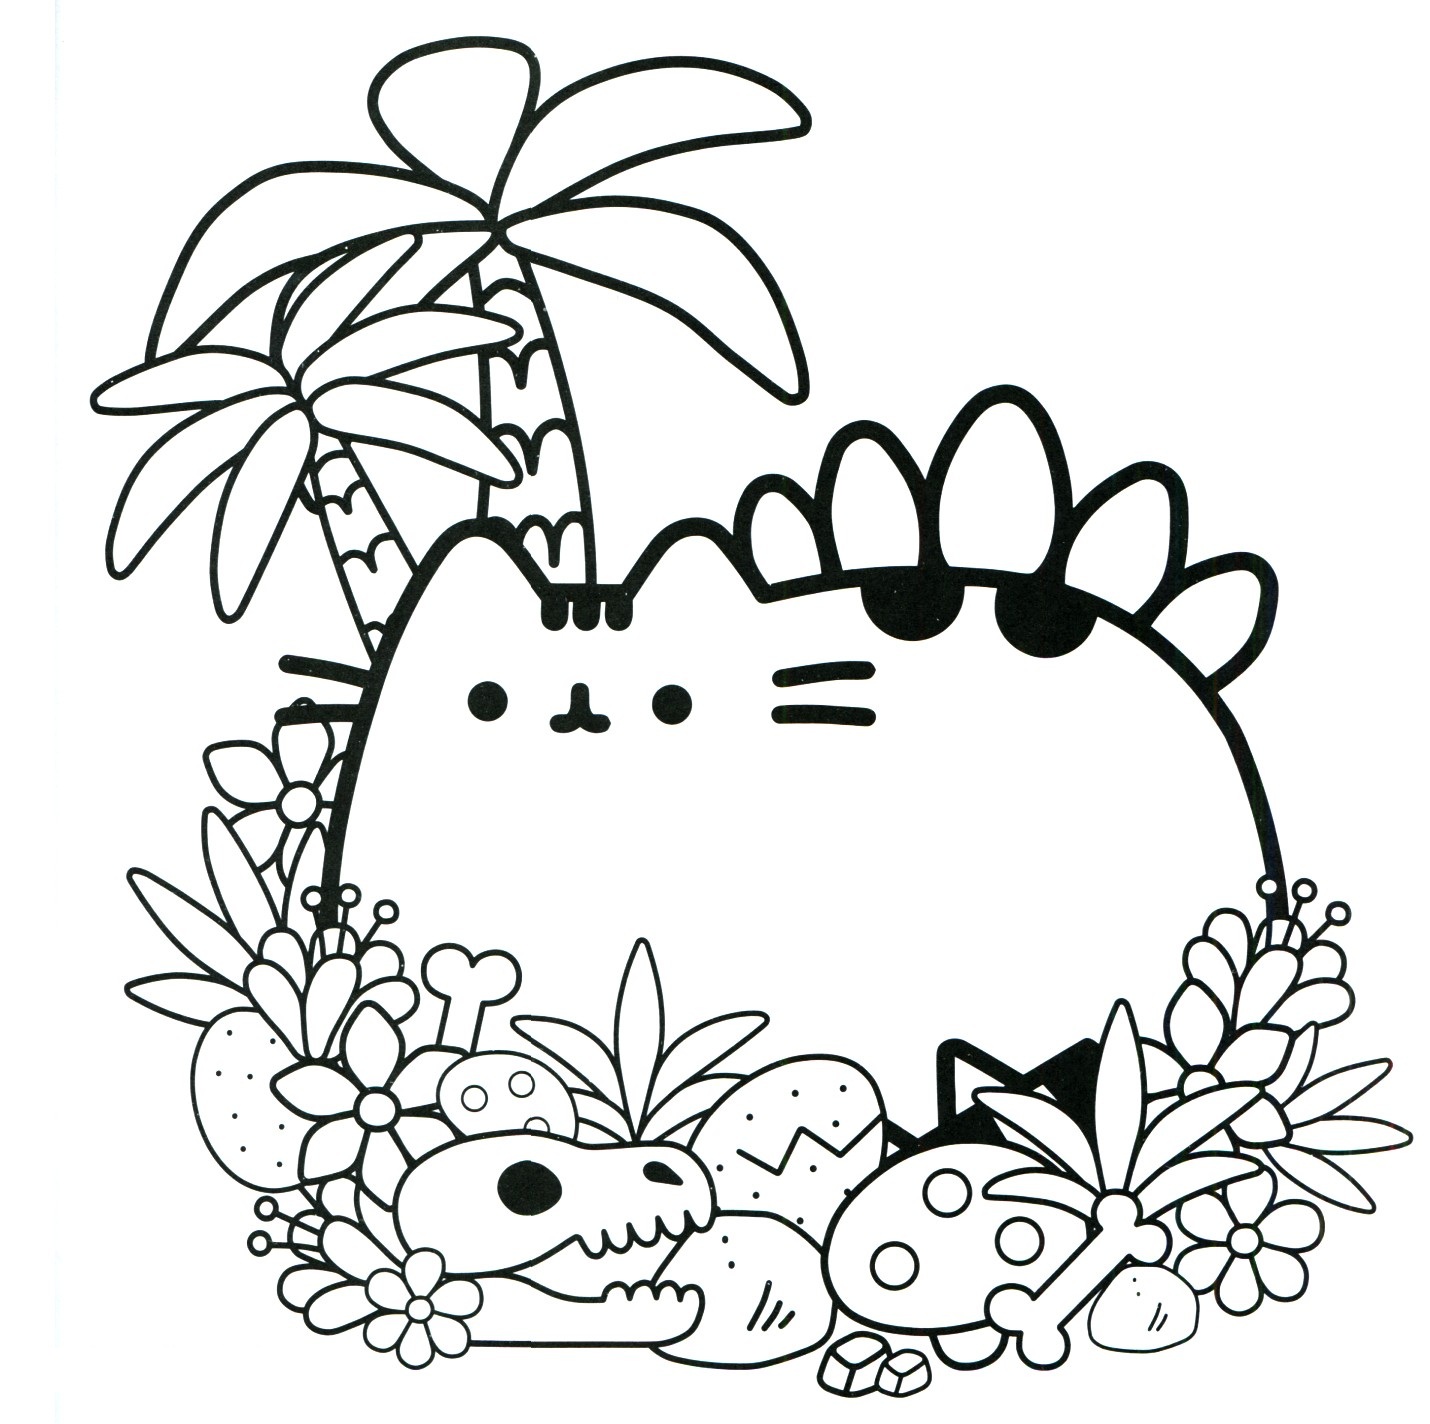 Cute Pusheen Coloring Page Free Printable Coloring Pages for Kids